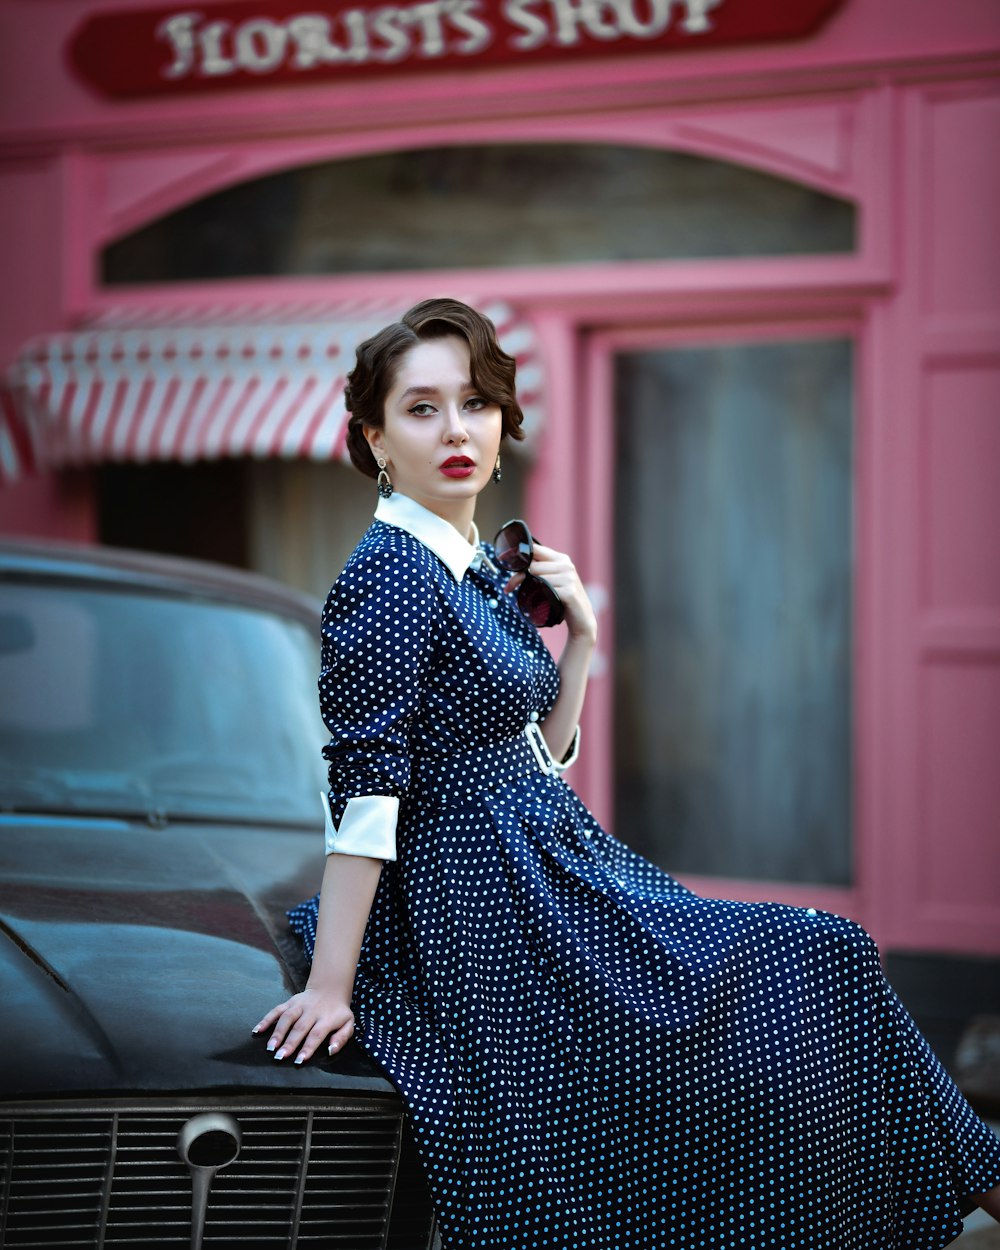 a woman in a polka dot dress leaning on a car